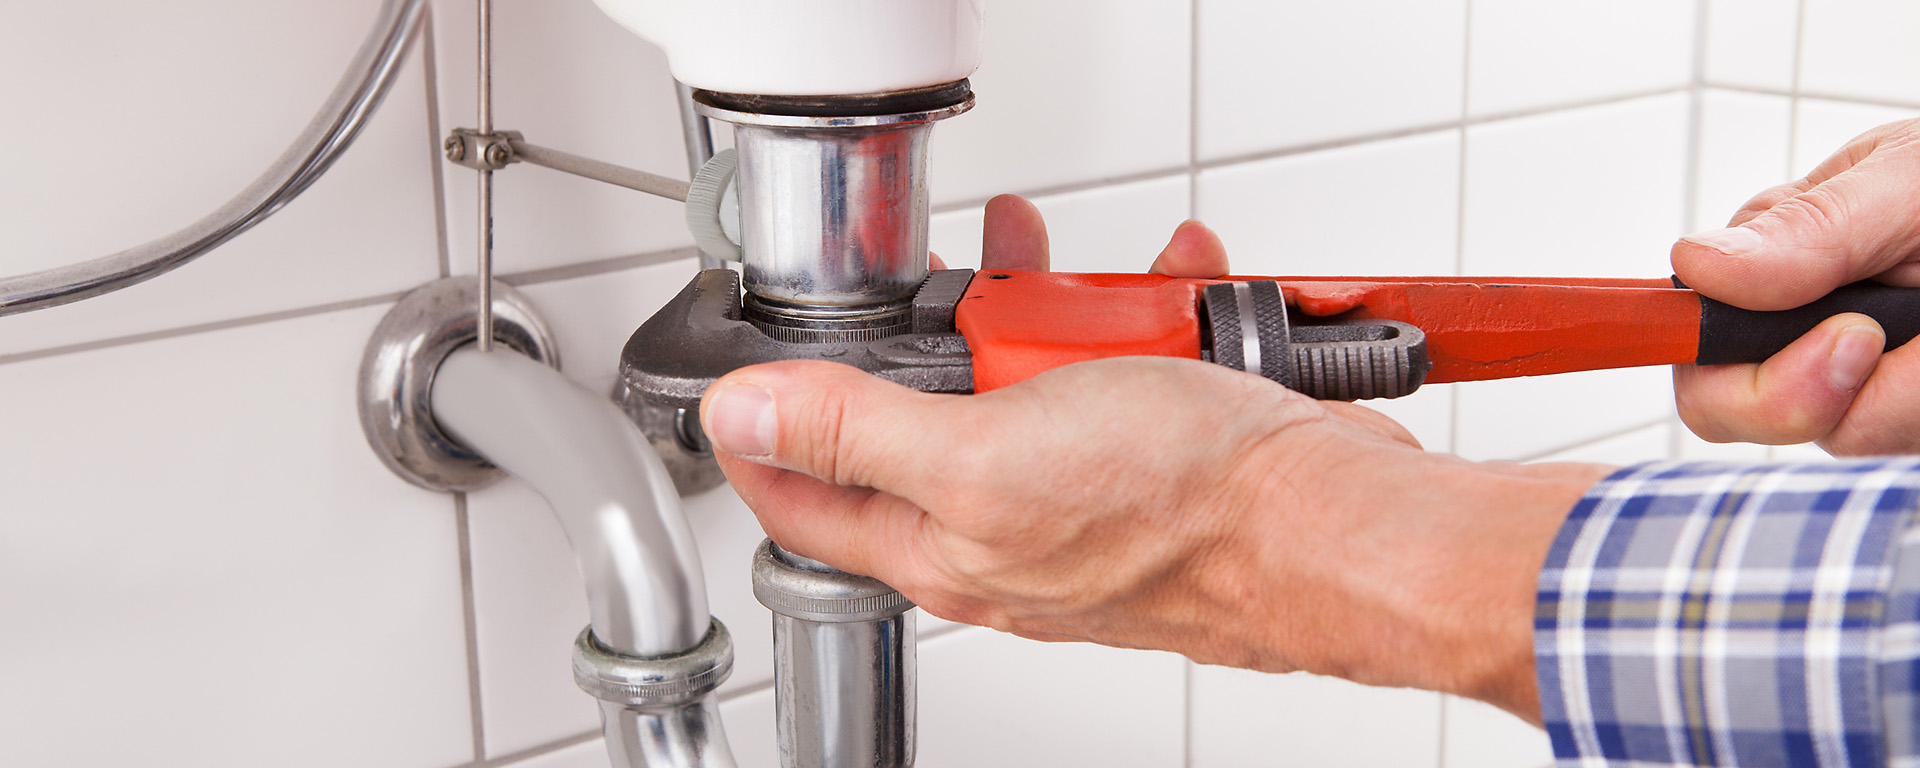 Plumber holding pipe wrench unscrewing a drain pipe. 